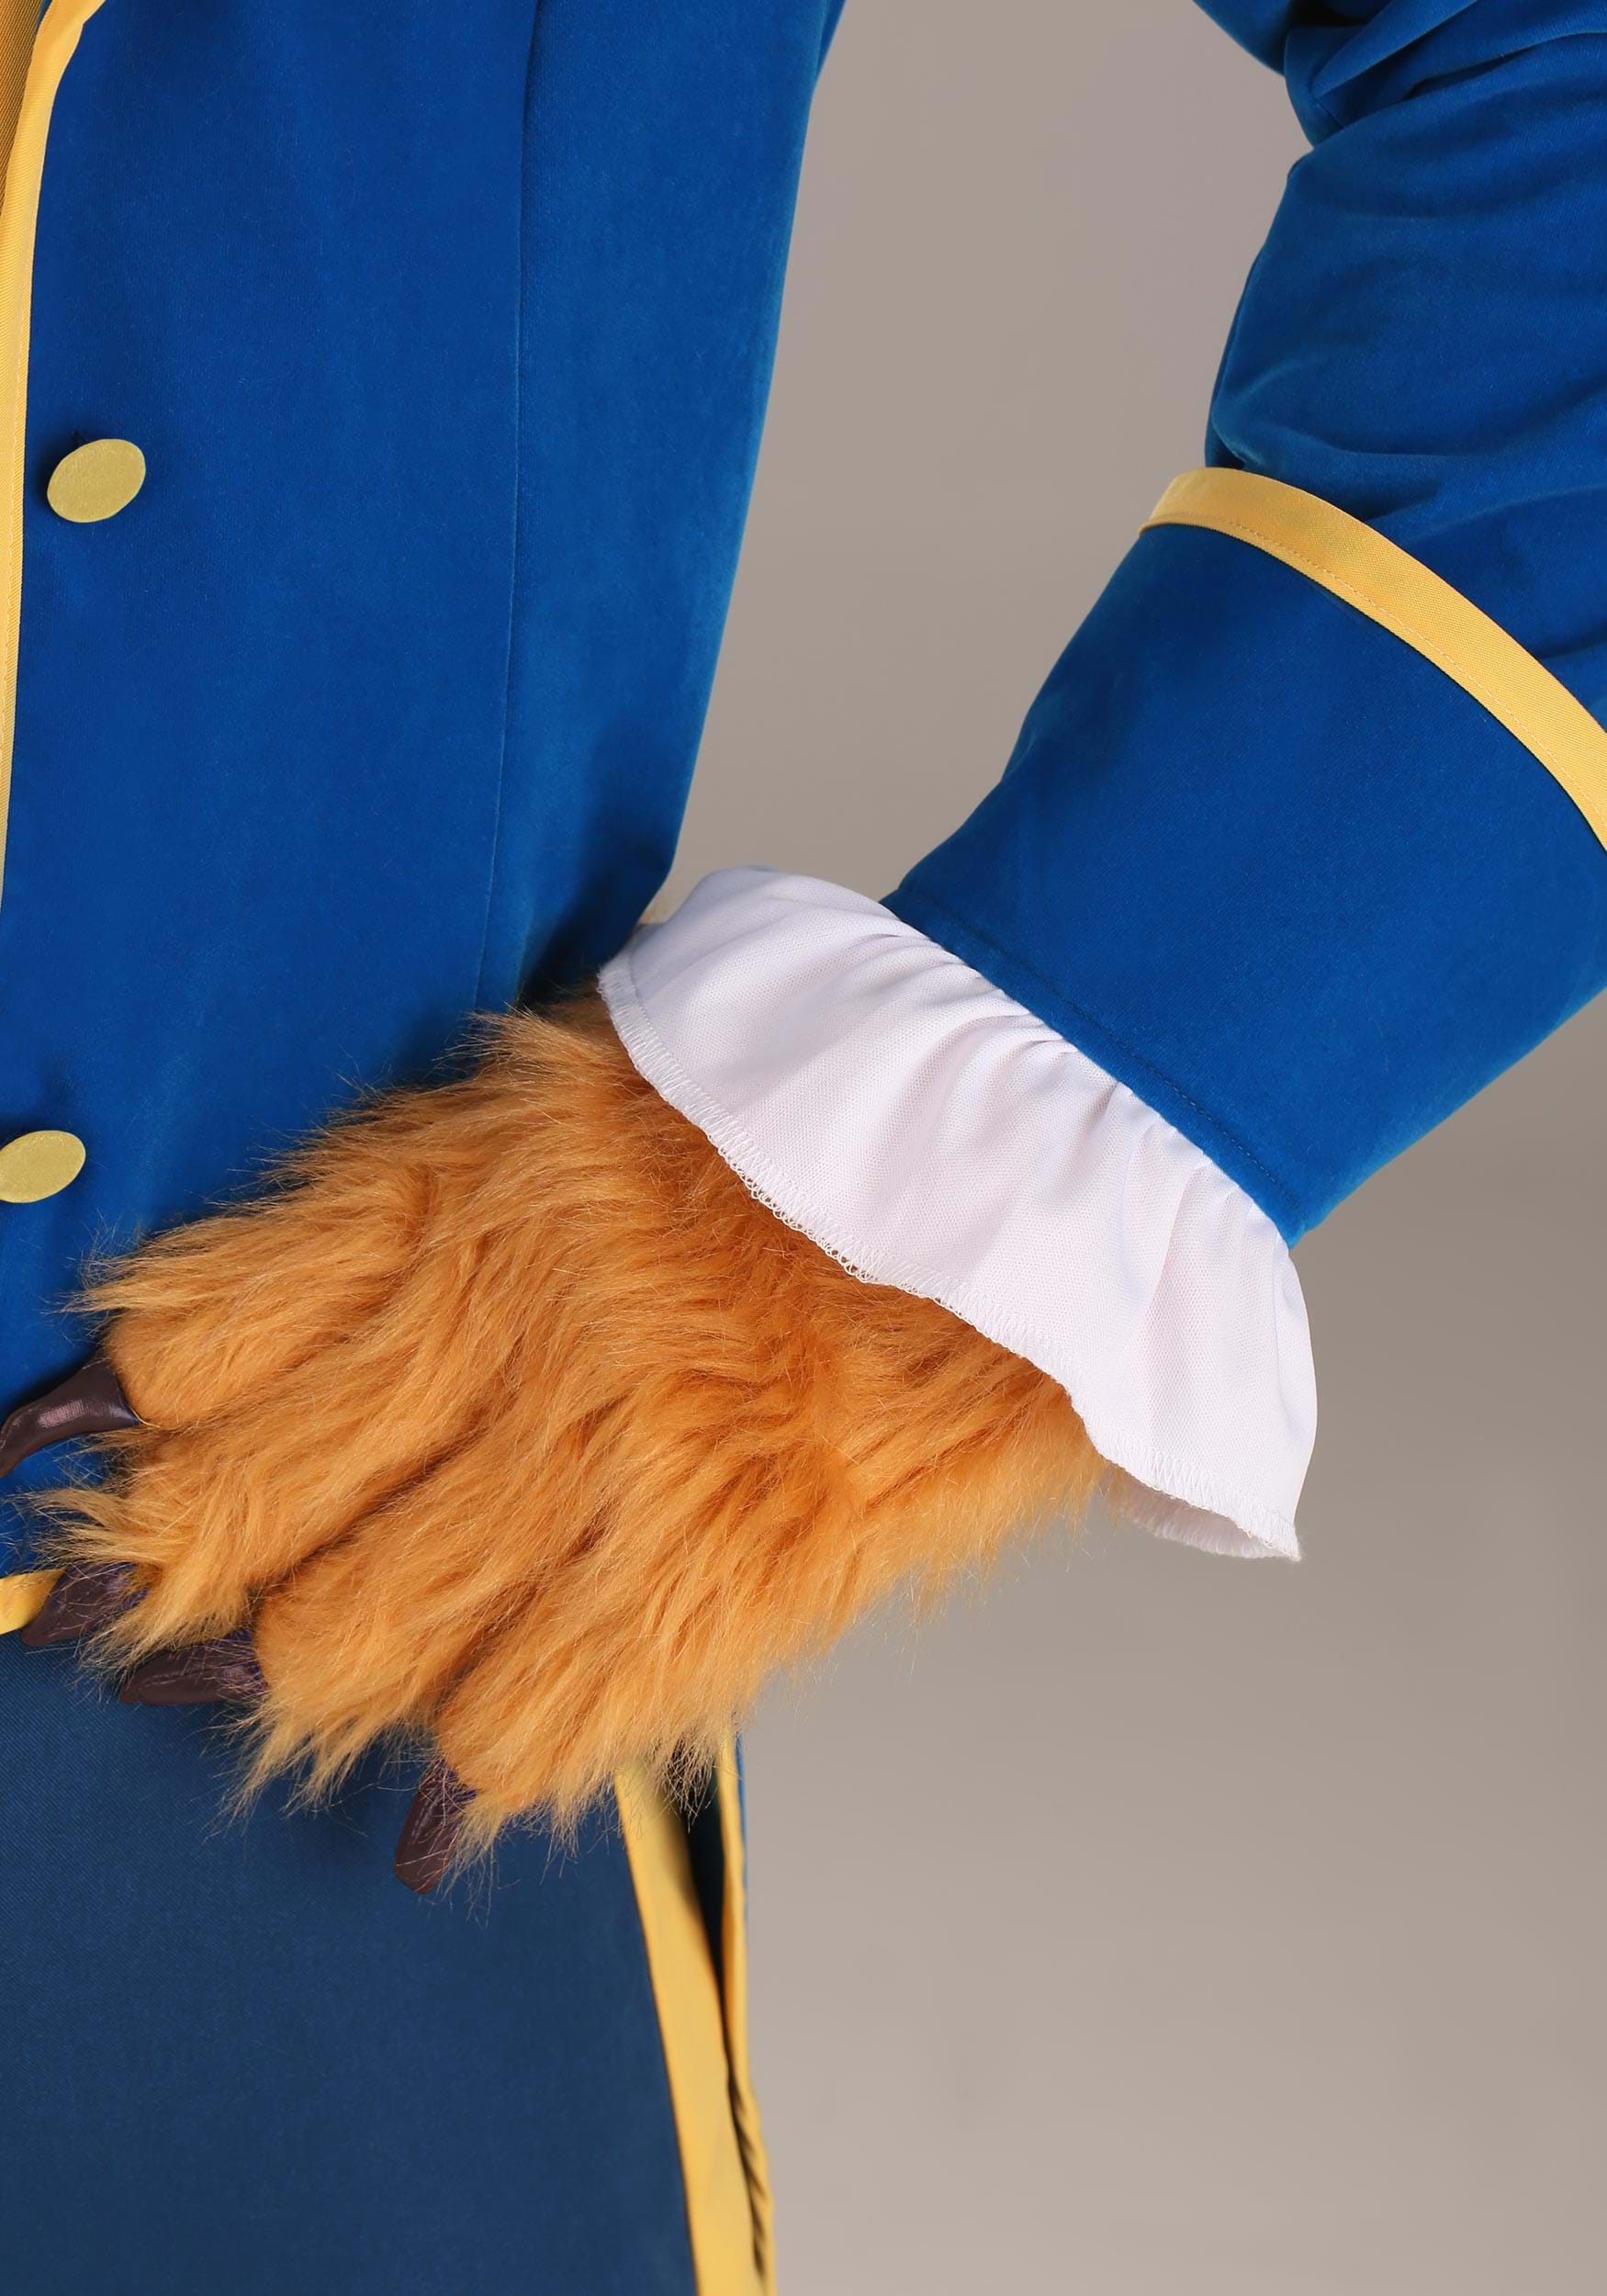 Men's Beauty And The Beast Authentic Beast Costume